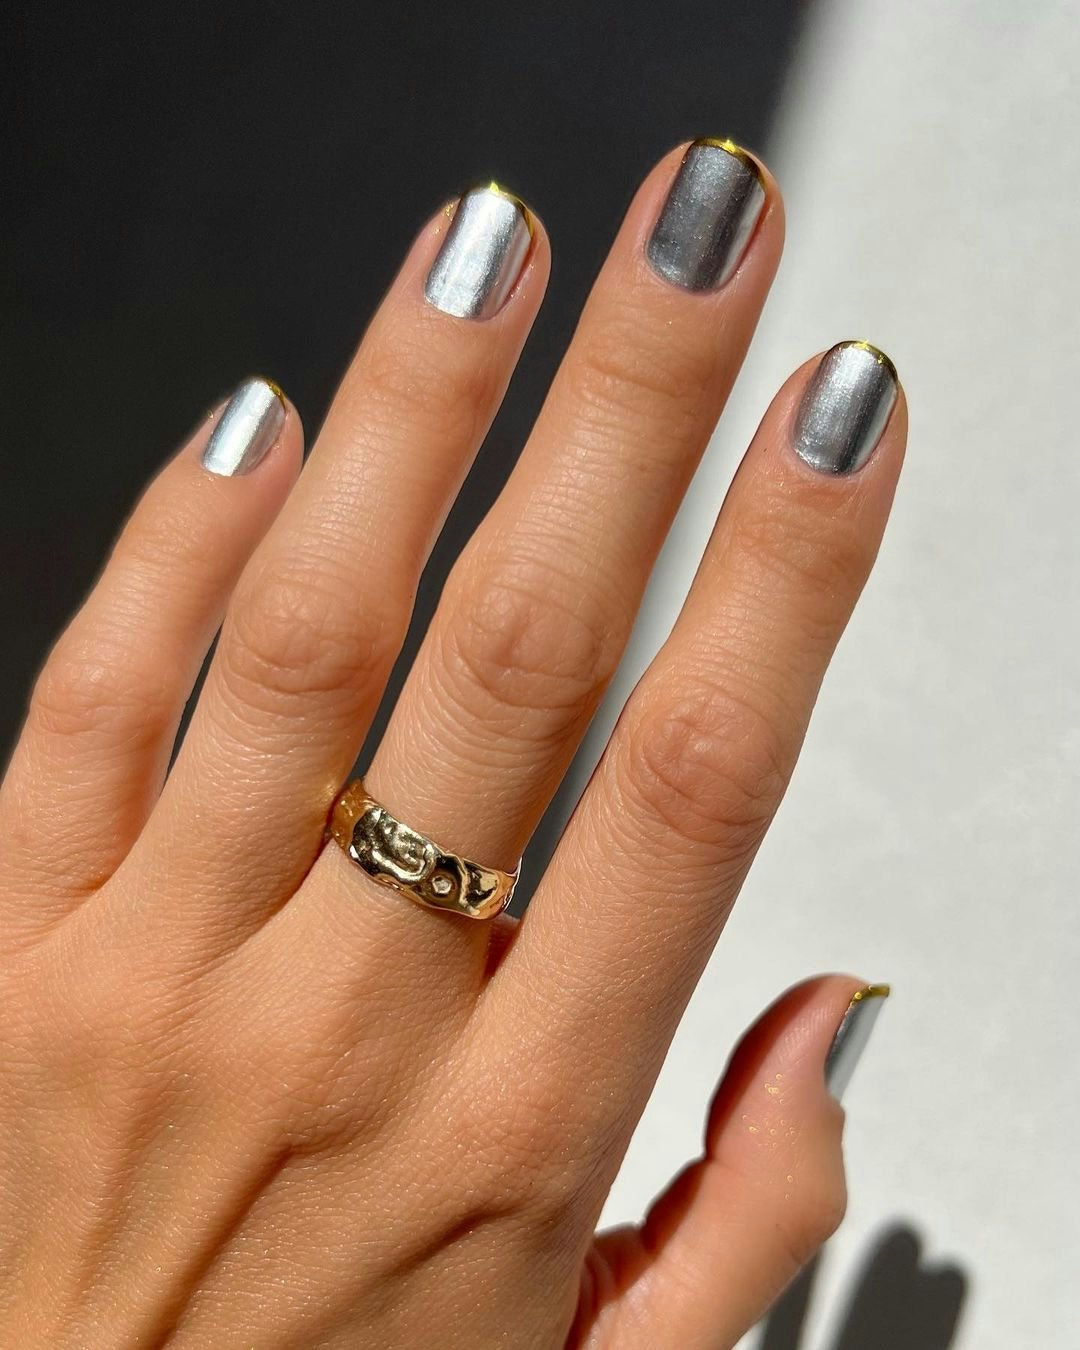 Iridescent Nails Are Trending for 2020 — See the Photos | Allure